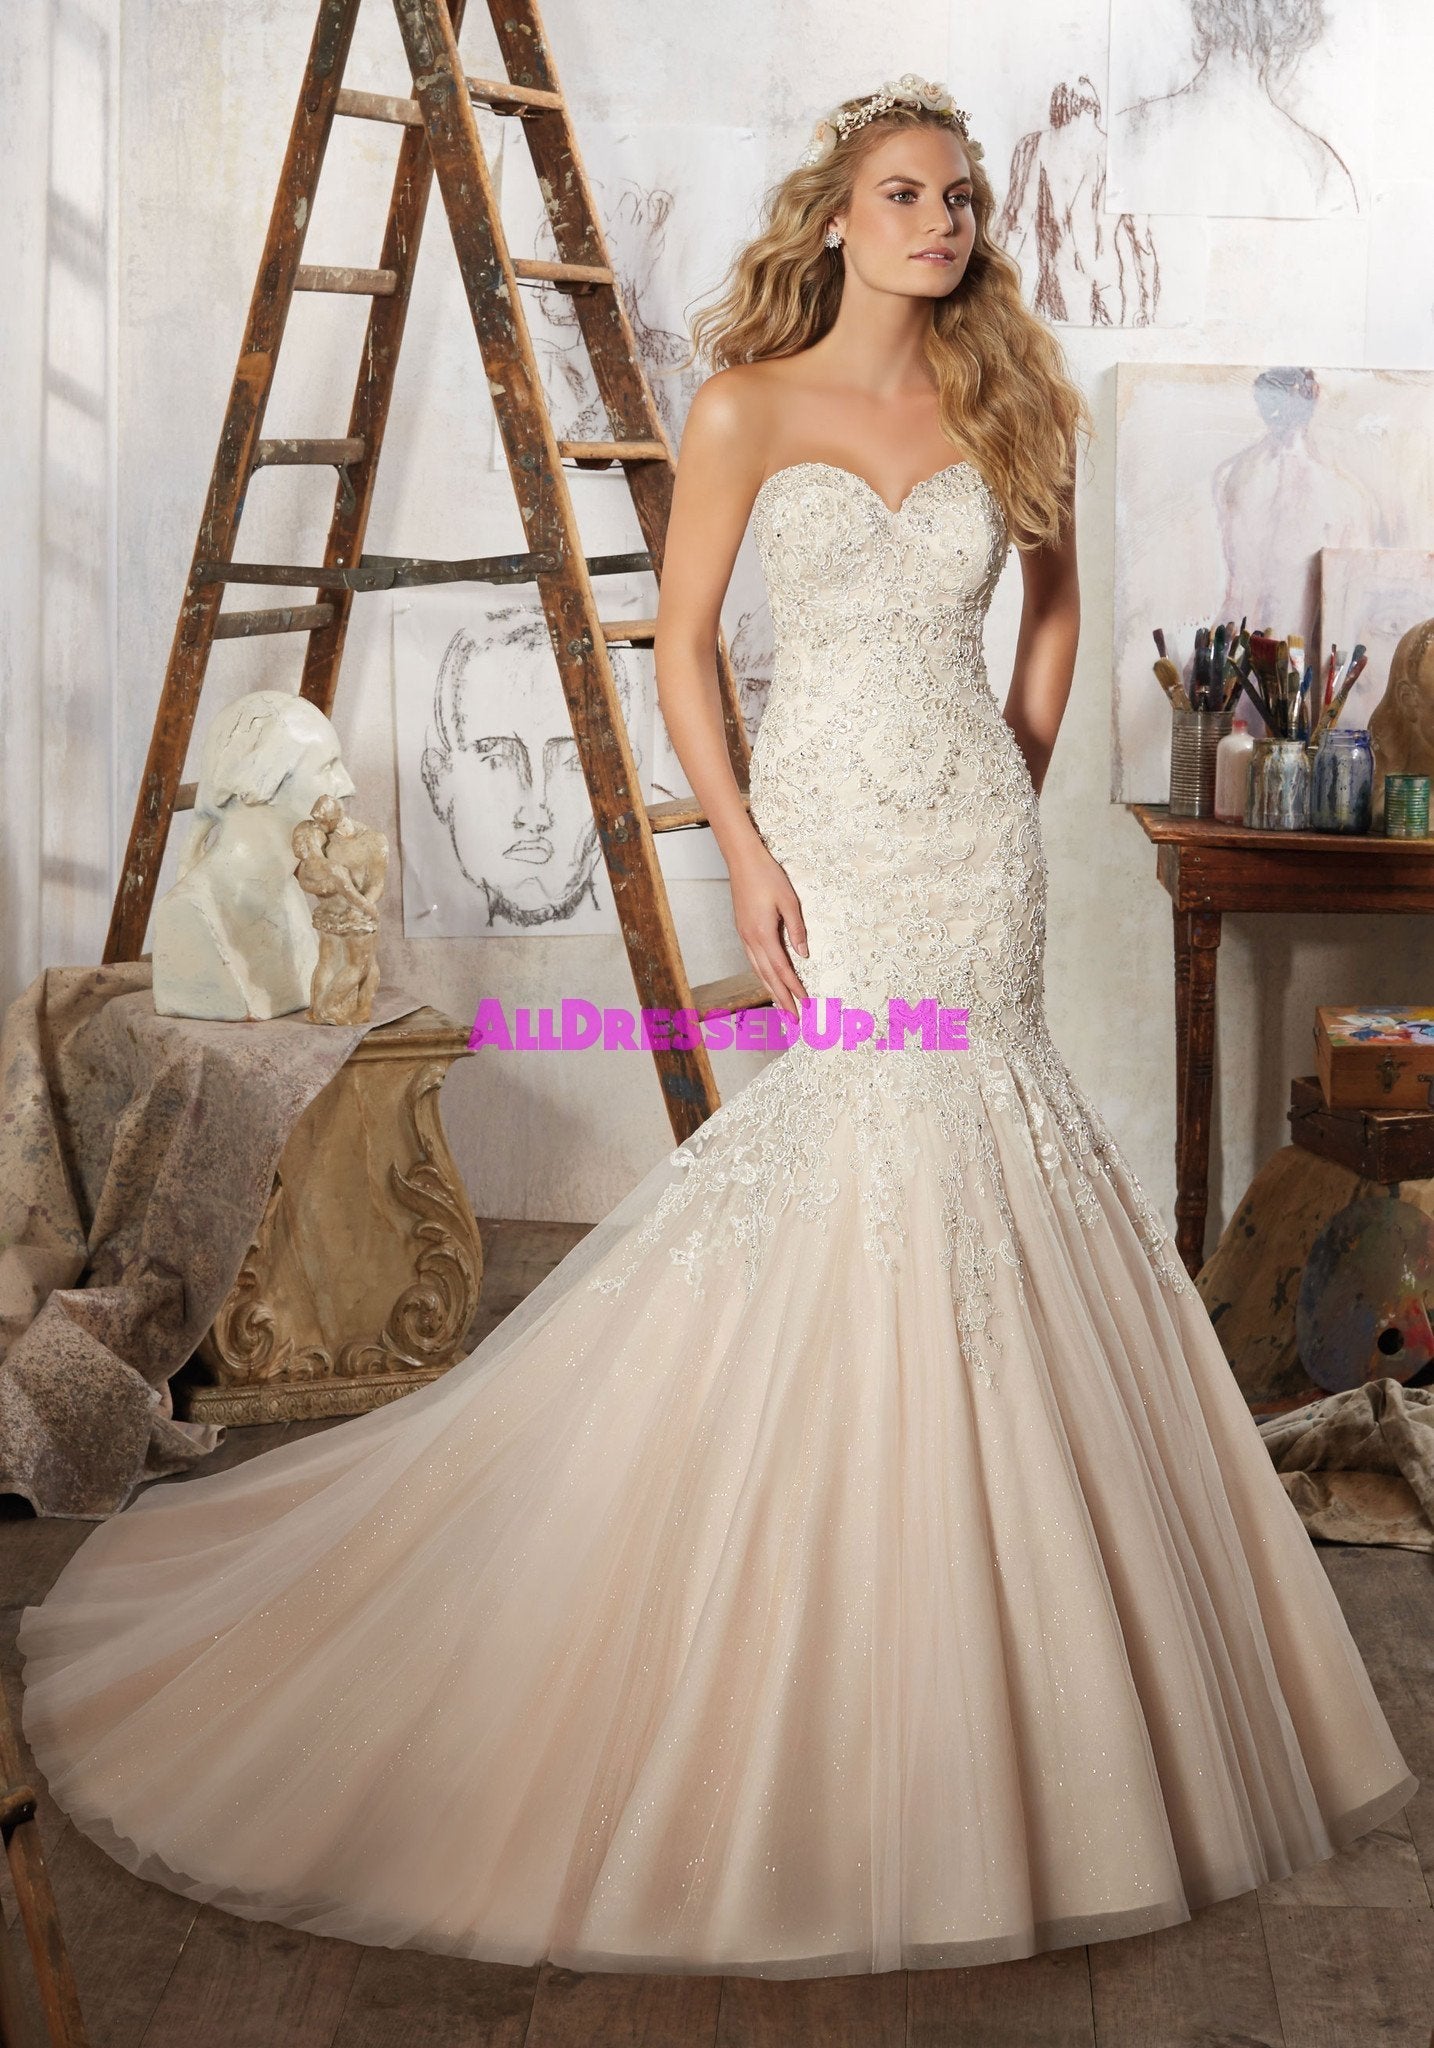 Morilee Line Wedding Dresses / Bridal Gowns - All Page 4 - Cheron's Bridal  & All Dressed Up Prom